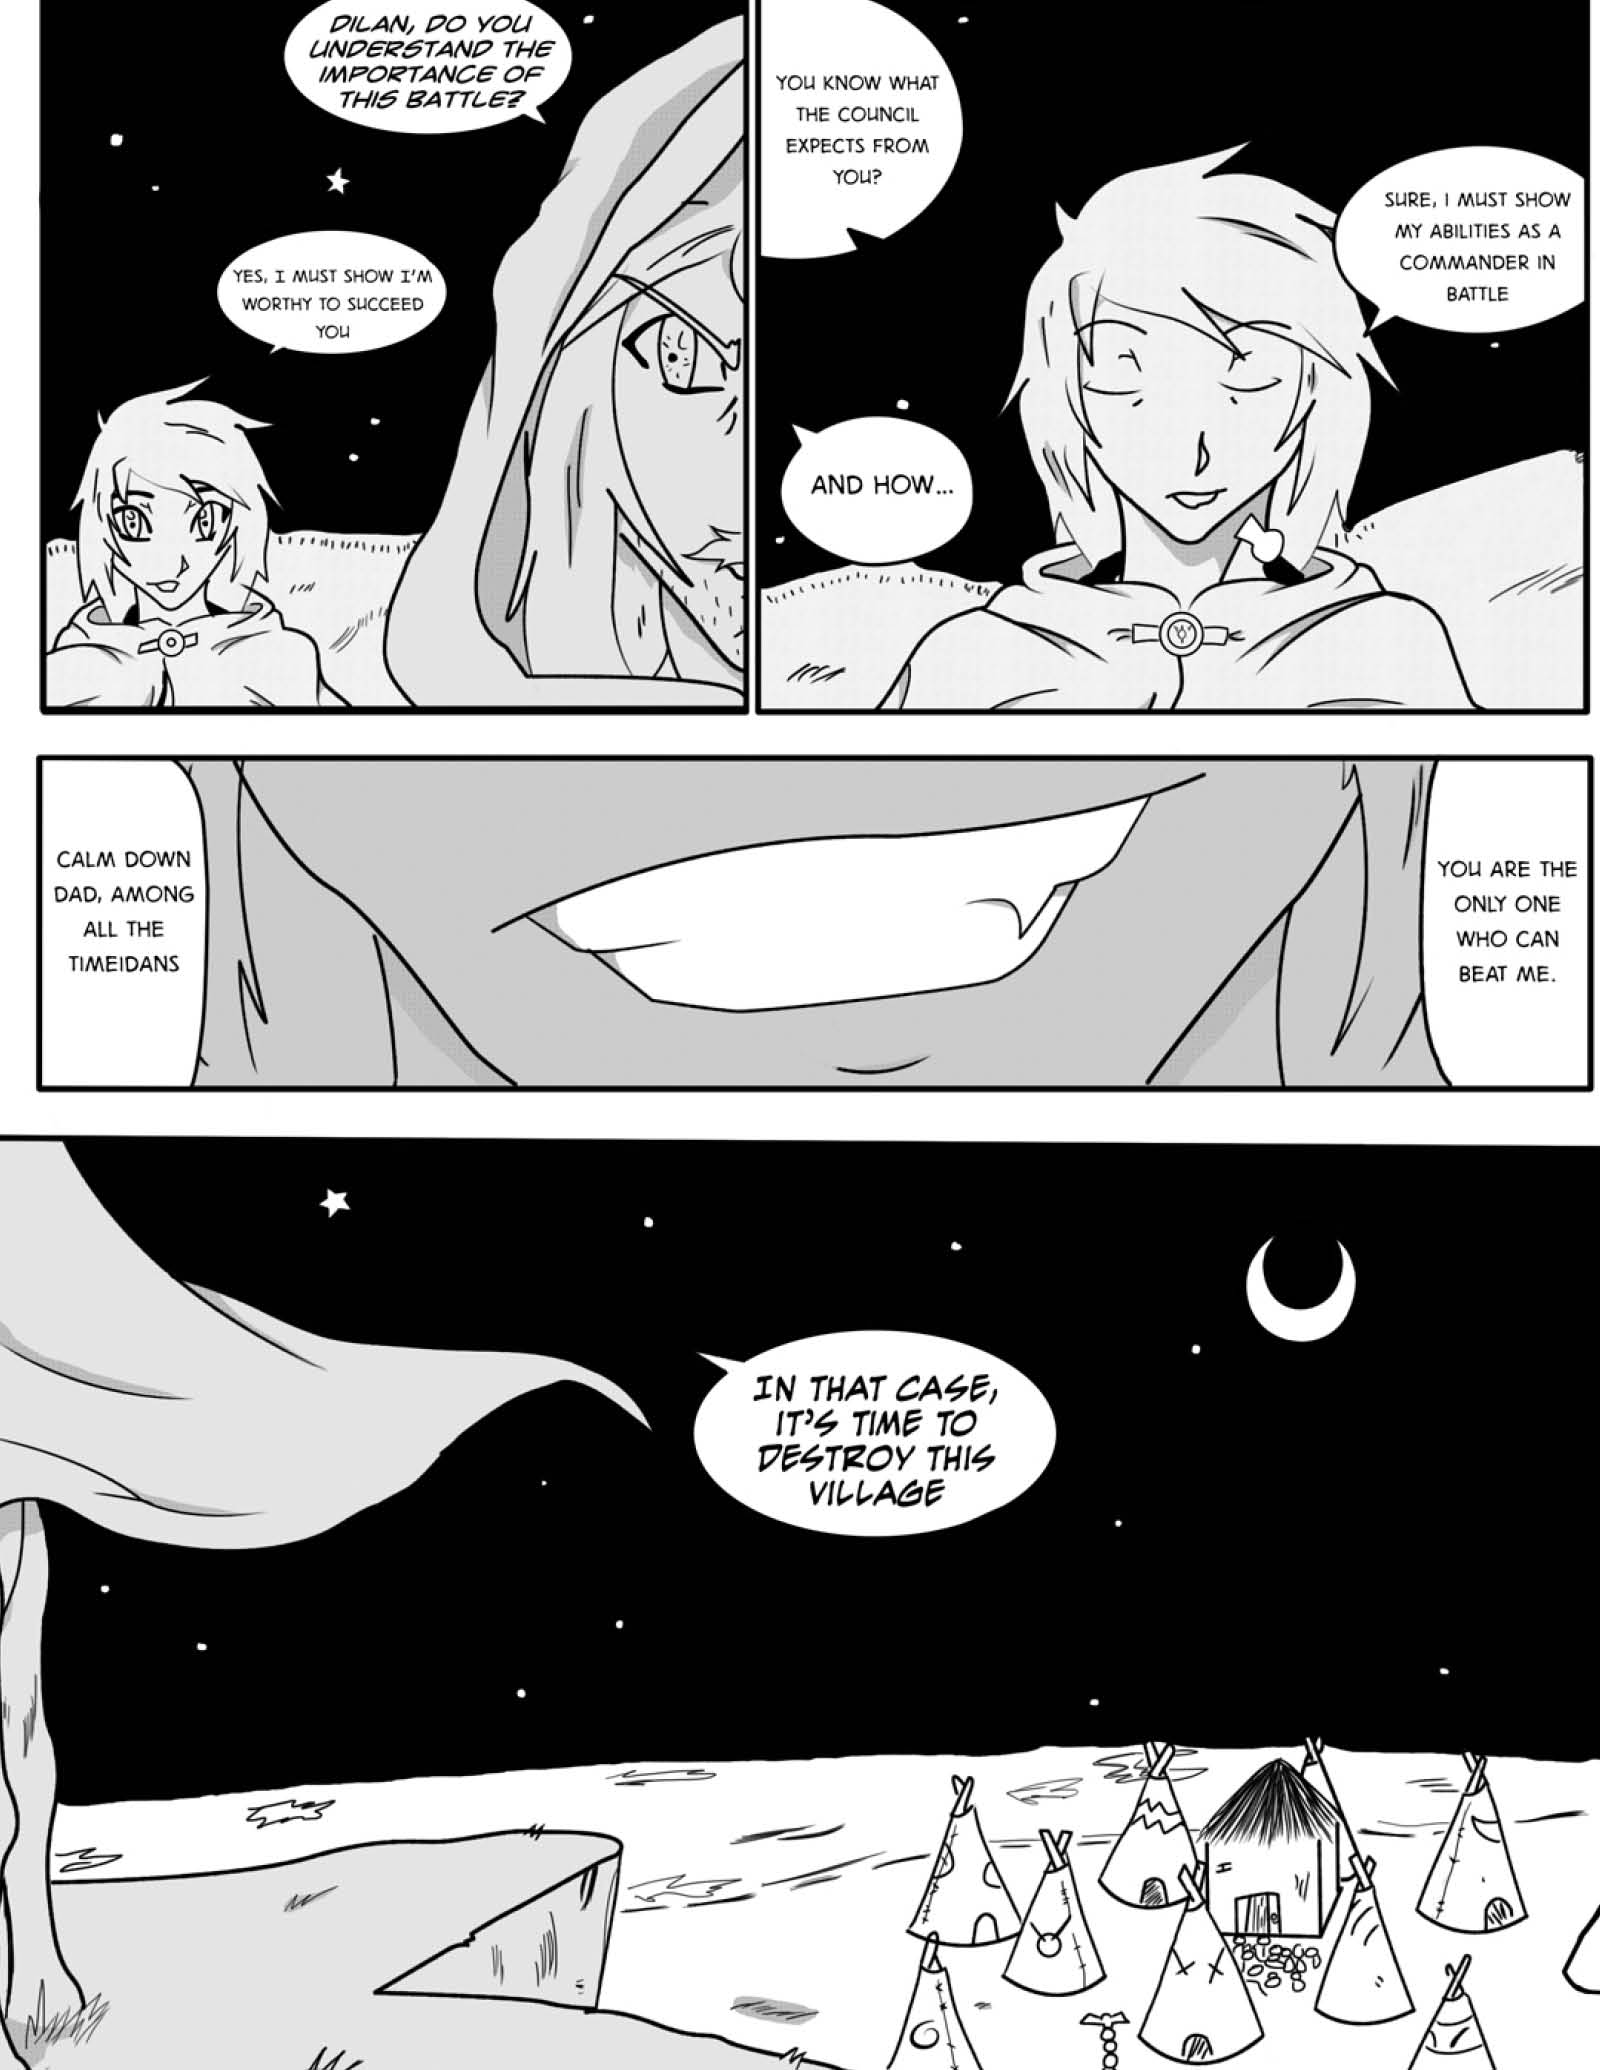 Series Dilan: the Chronicles of Covak - Chapter 1 - Page 4 - Language ENG